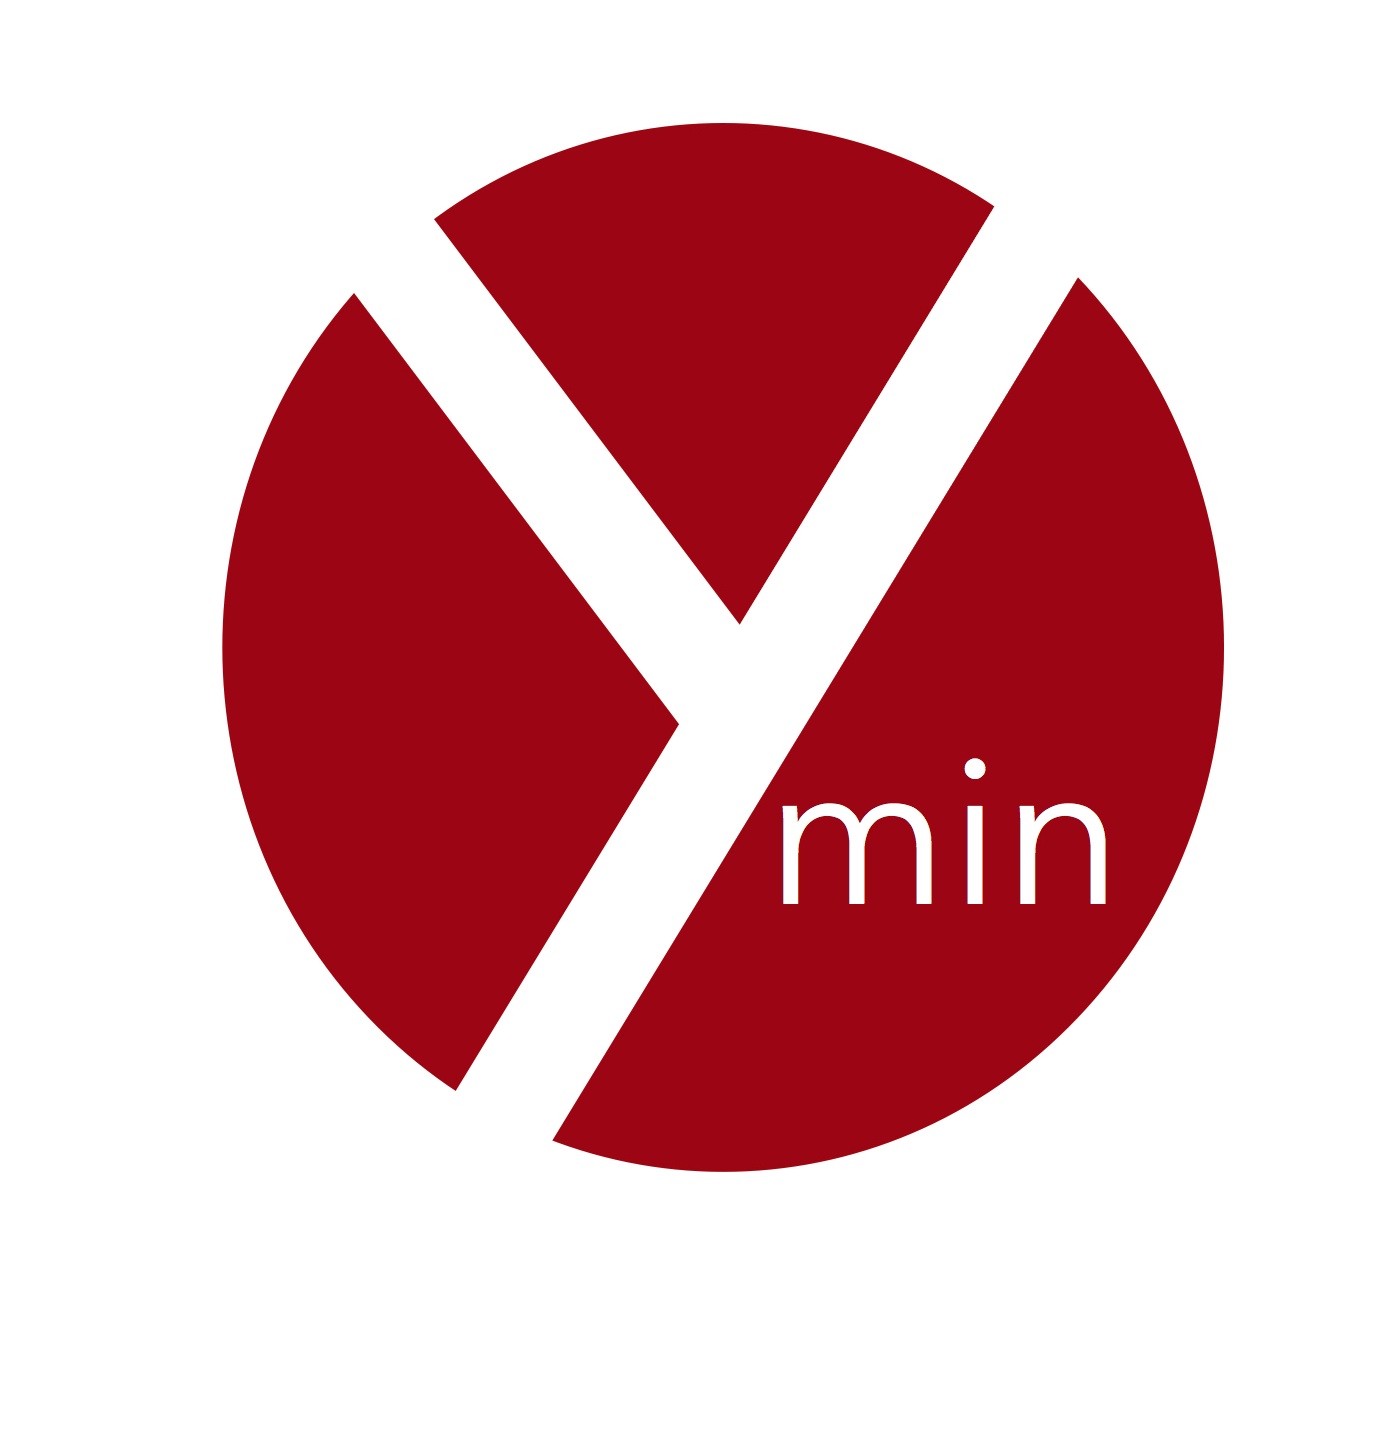 ymin podcasts - Youth @ St. Paul's